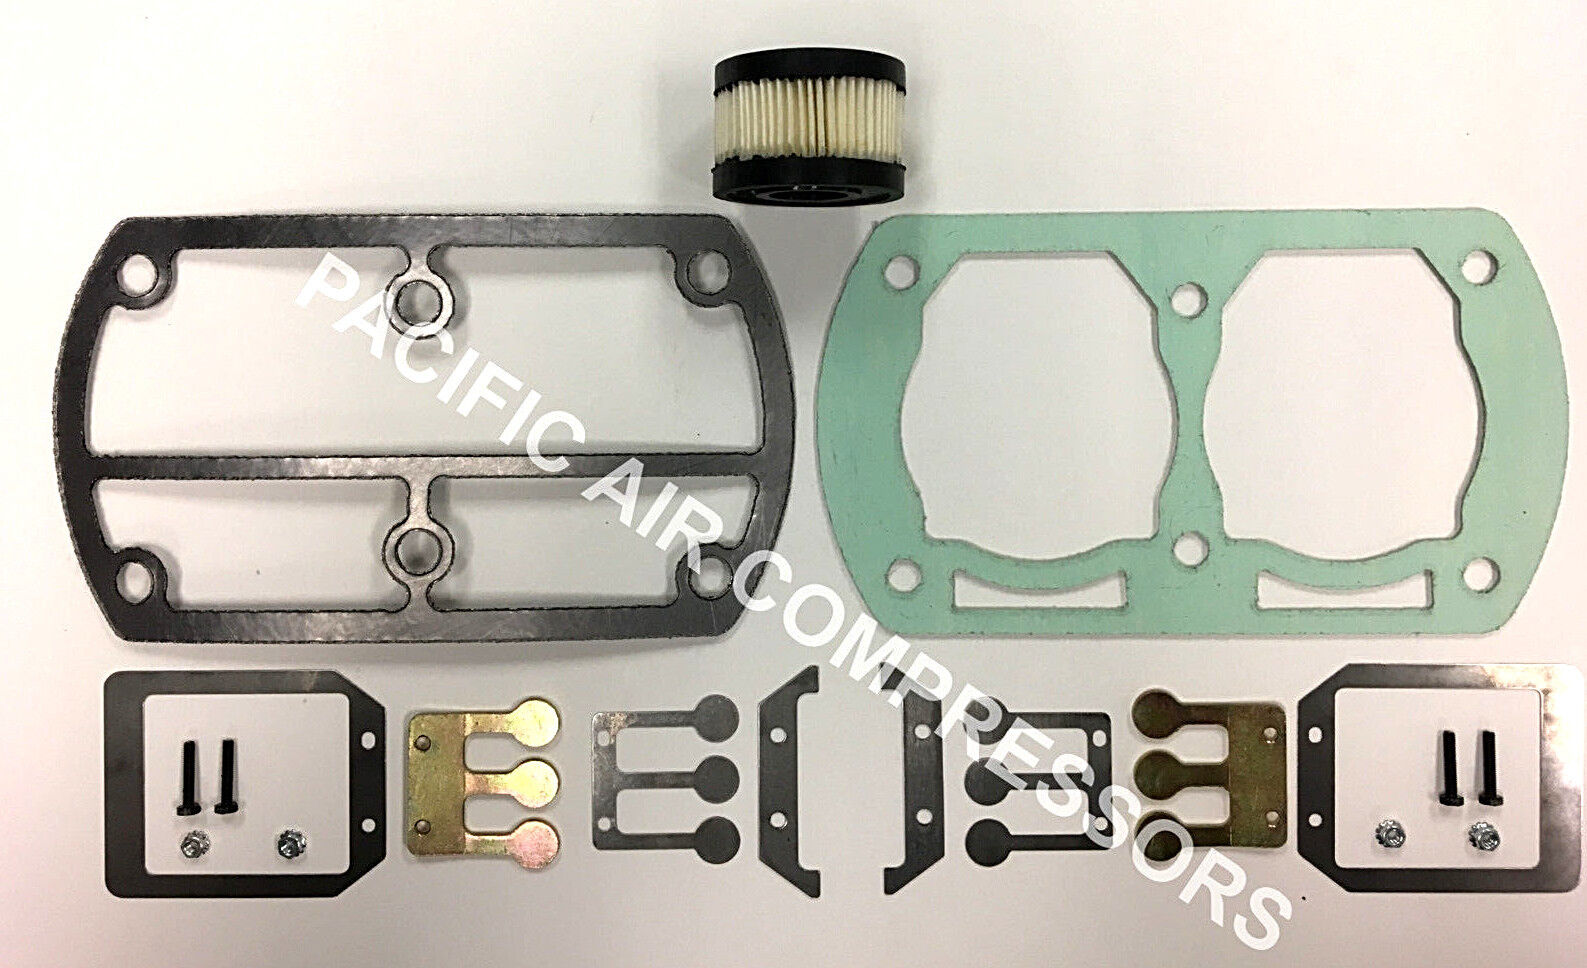 SS3 INGERSOLL RAND COMPATIBLE VALVE KIT W/ PARTS 97338107 & 70243712